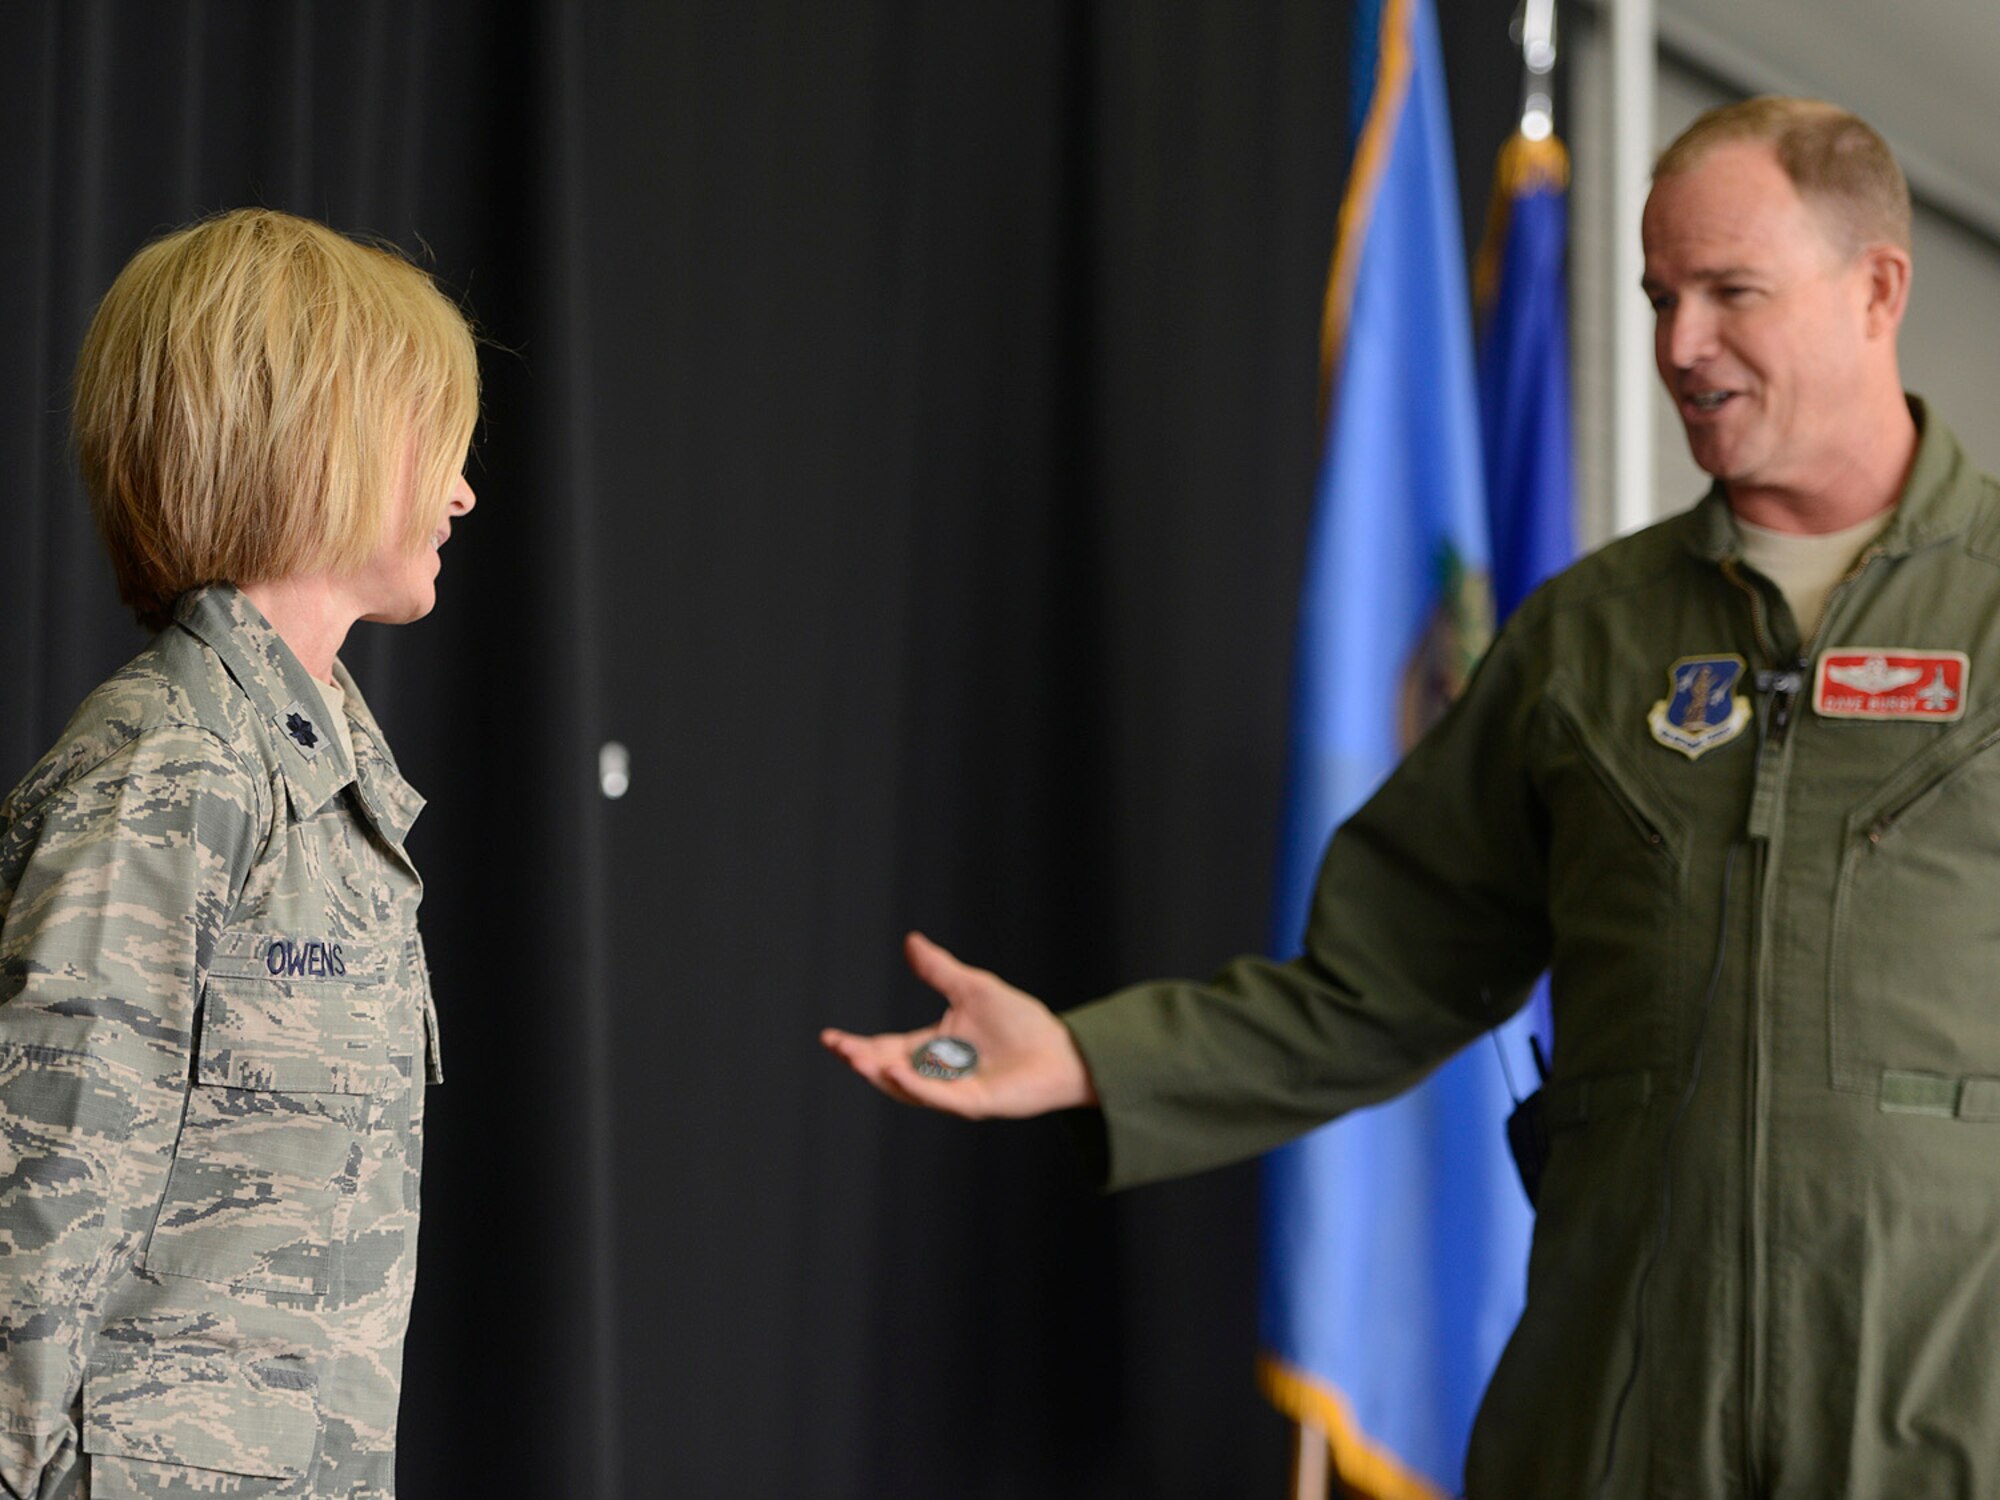 Colonel David B. Burgy, 138th Fighter Wing Commander, presents the 138th FW Coin of Excellence to Lieutenant Colonel Deborah Owens, 138th Medical Squadron, for her efforts in the organization and execution of conducting Physical Health Assessments for a large portion of the base population.  The presentation was made during a Commanders Call at the Tulsa Air National Guard base, June 8, 2014.  (U.S. National Guard photo by Master Sgt.  Mark A. Moore/Released)